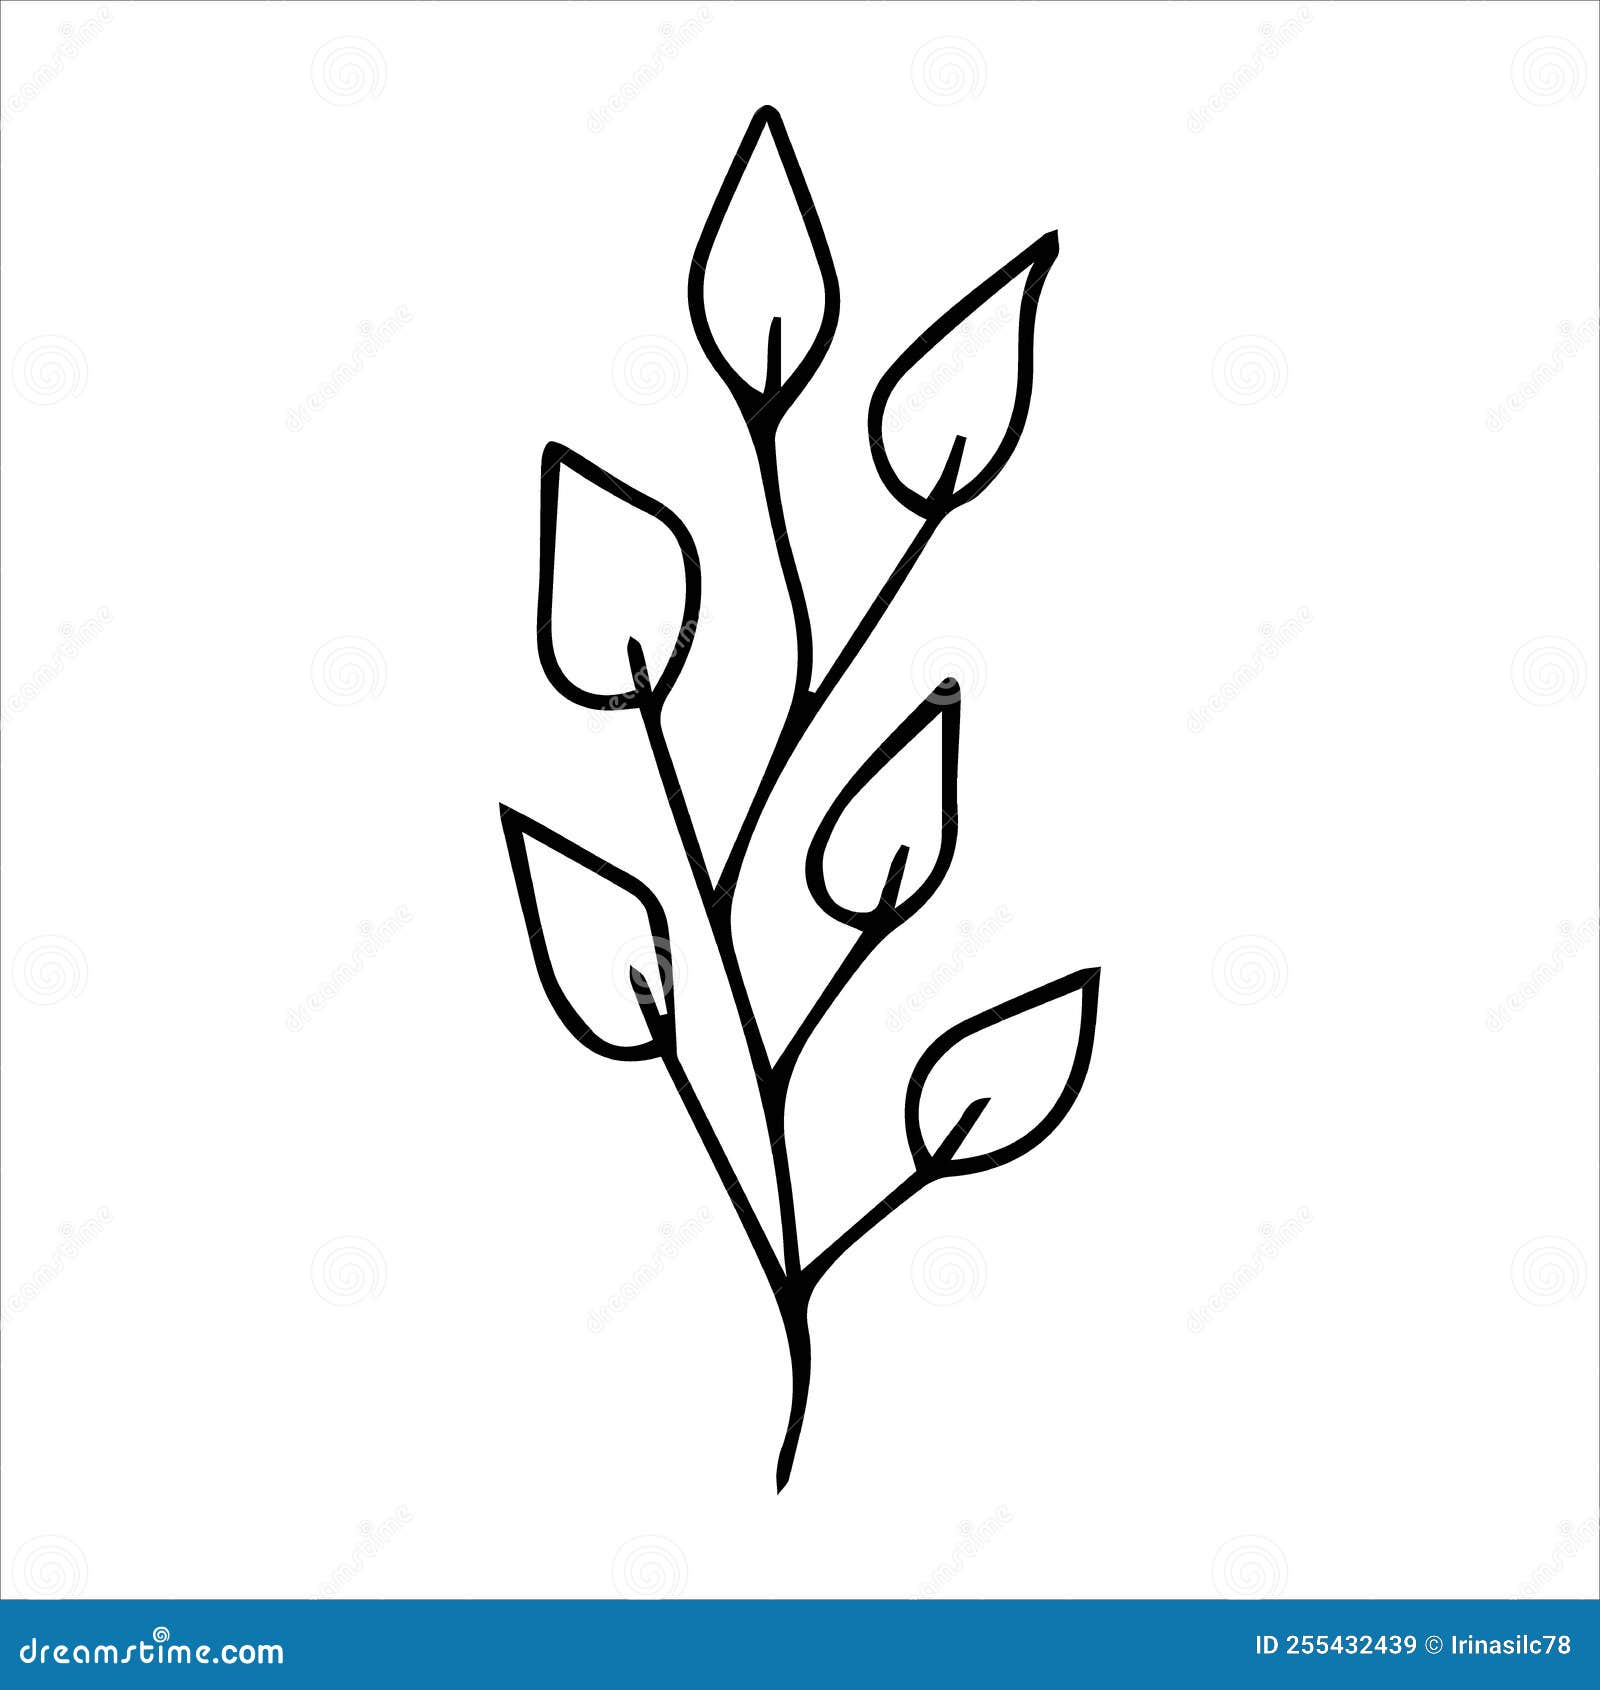 Cute doodle style twig stock vector. Illustration of symbol - 255432439